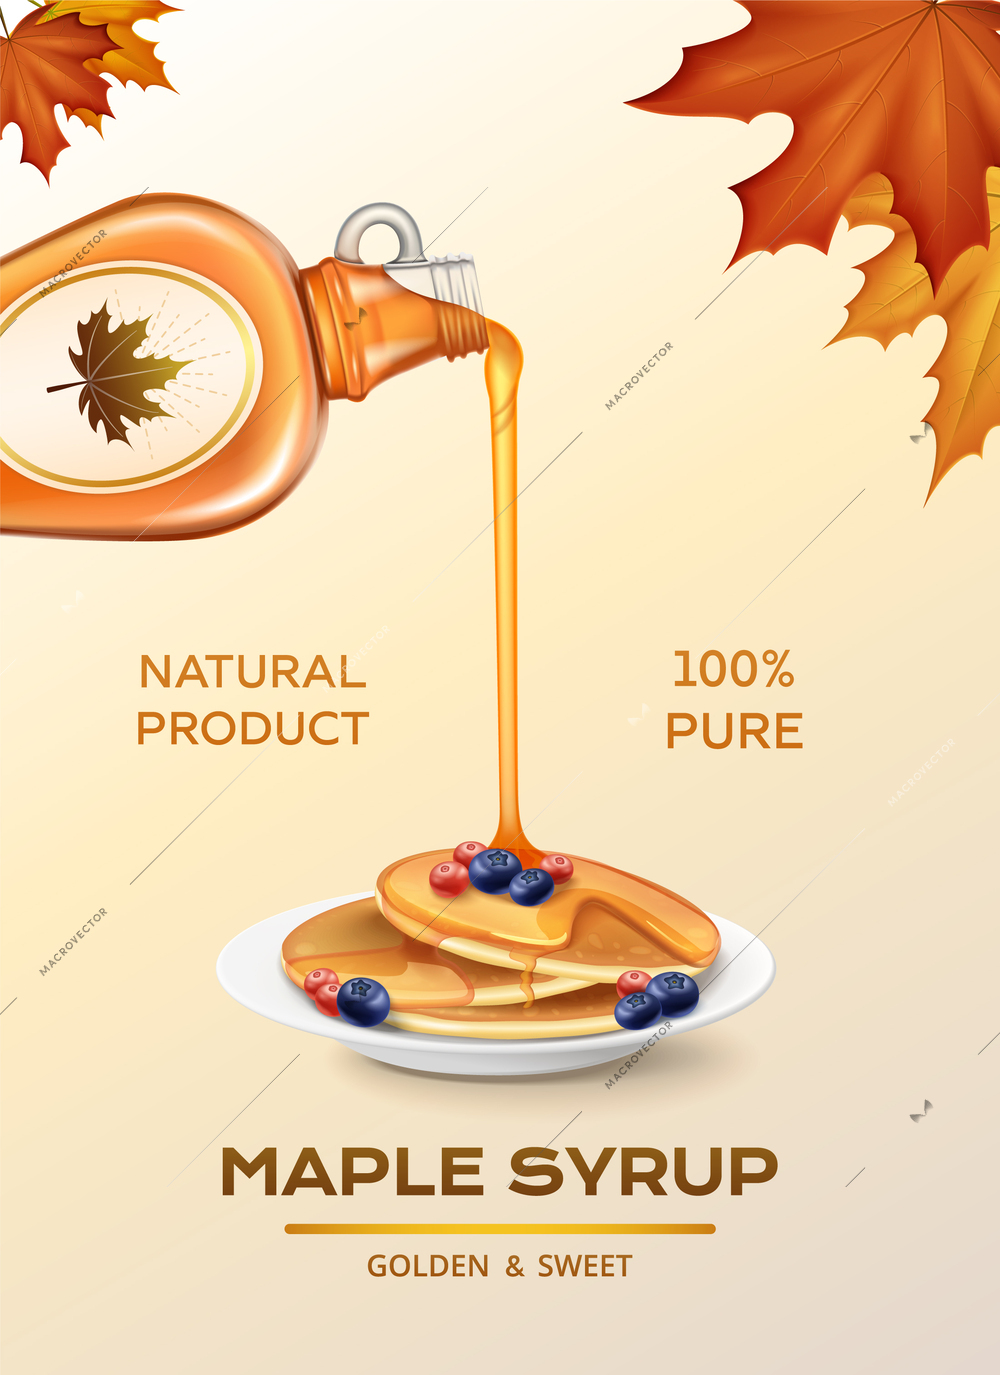 Pancakes with natural maple syrup realistic composition on background with autumn leaves vector illustration